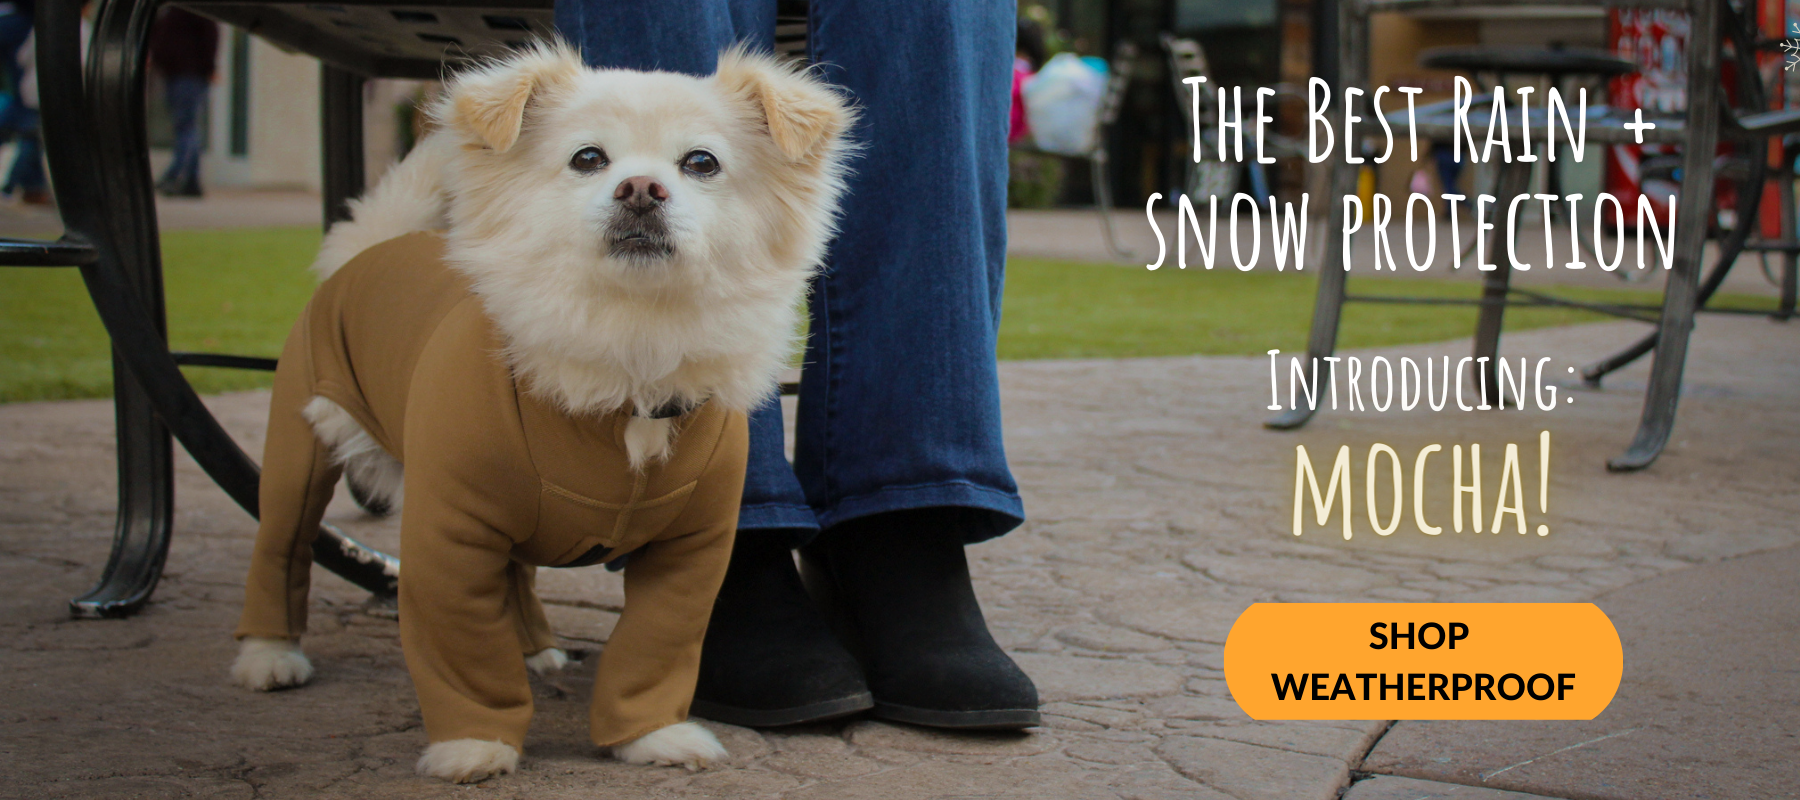 Rain and Snow Protection Bodysuit for Dogs